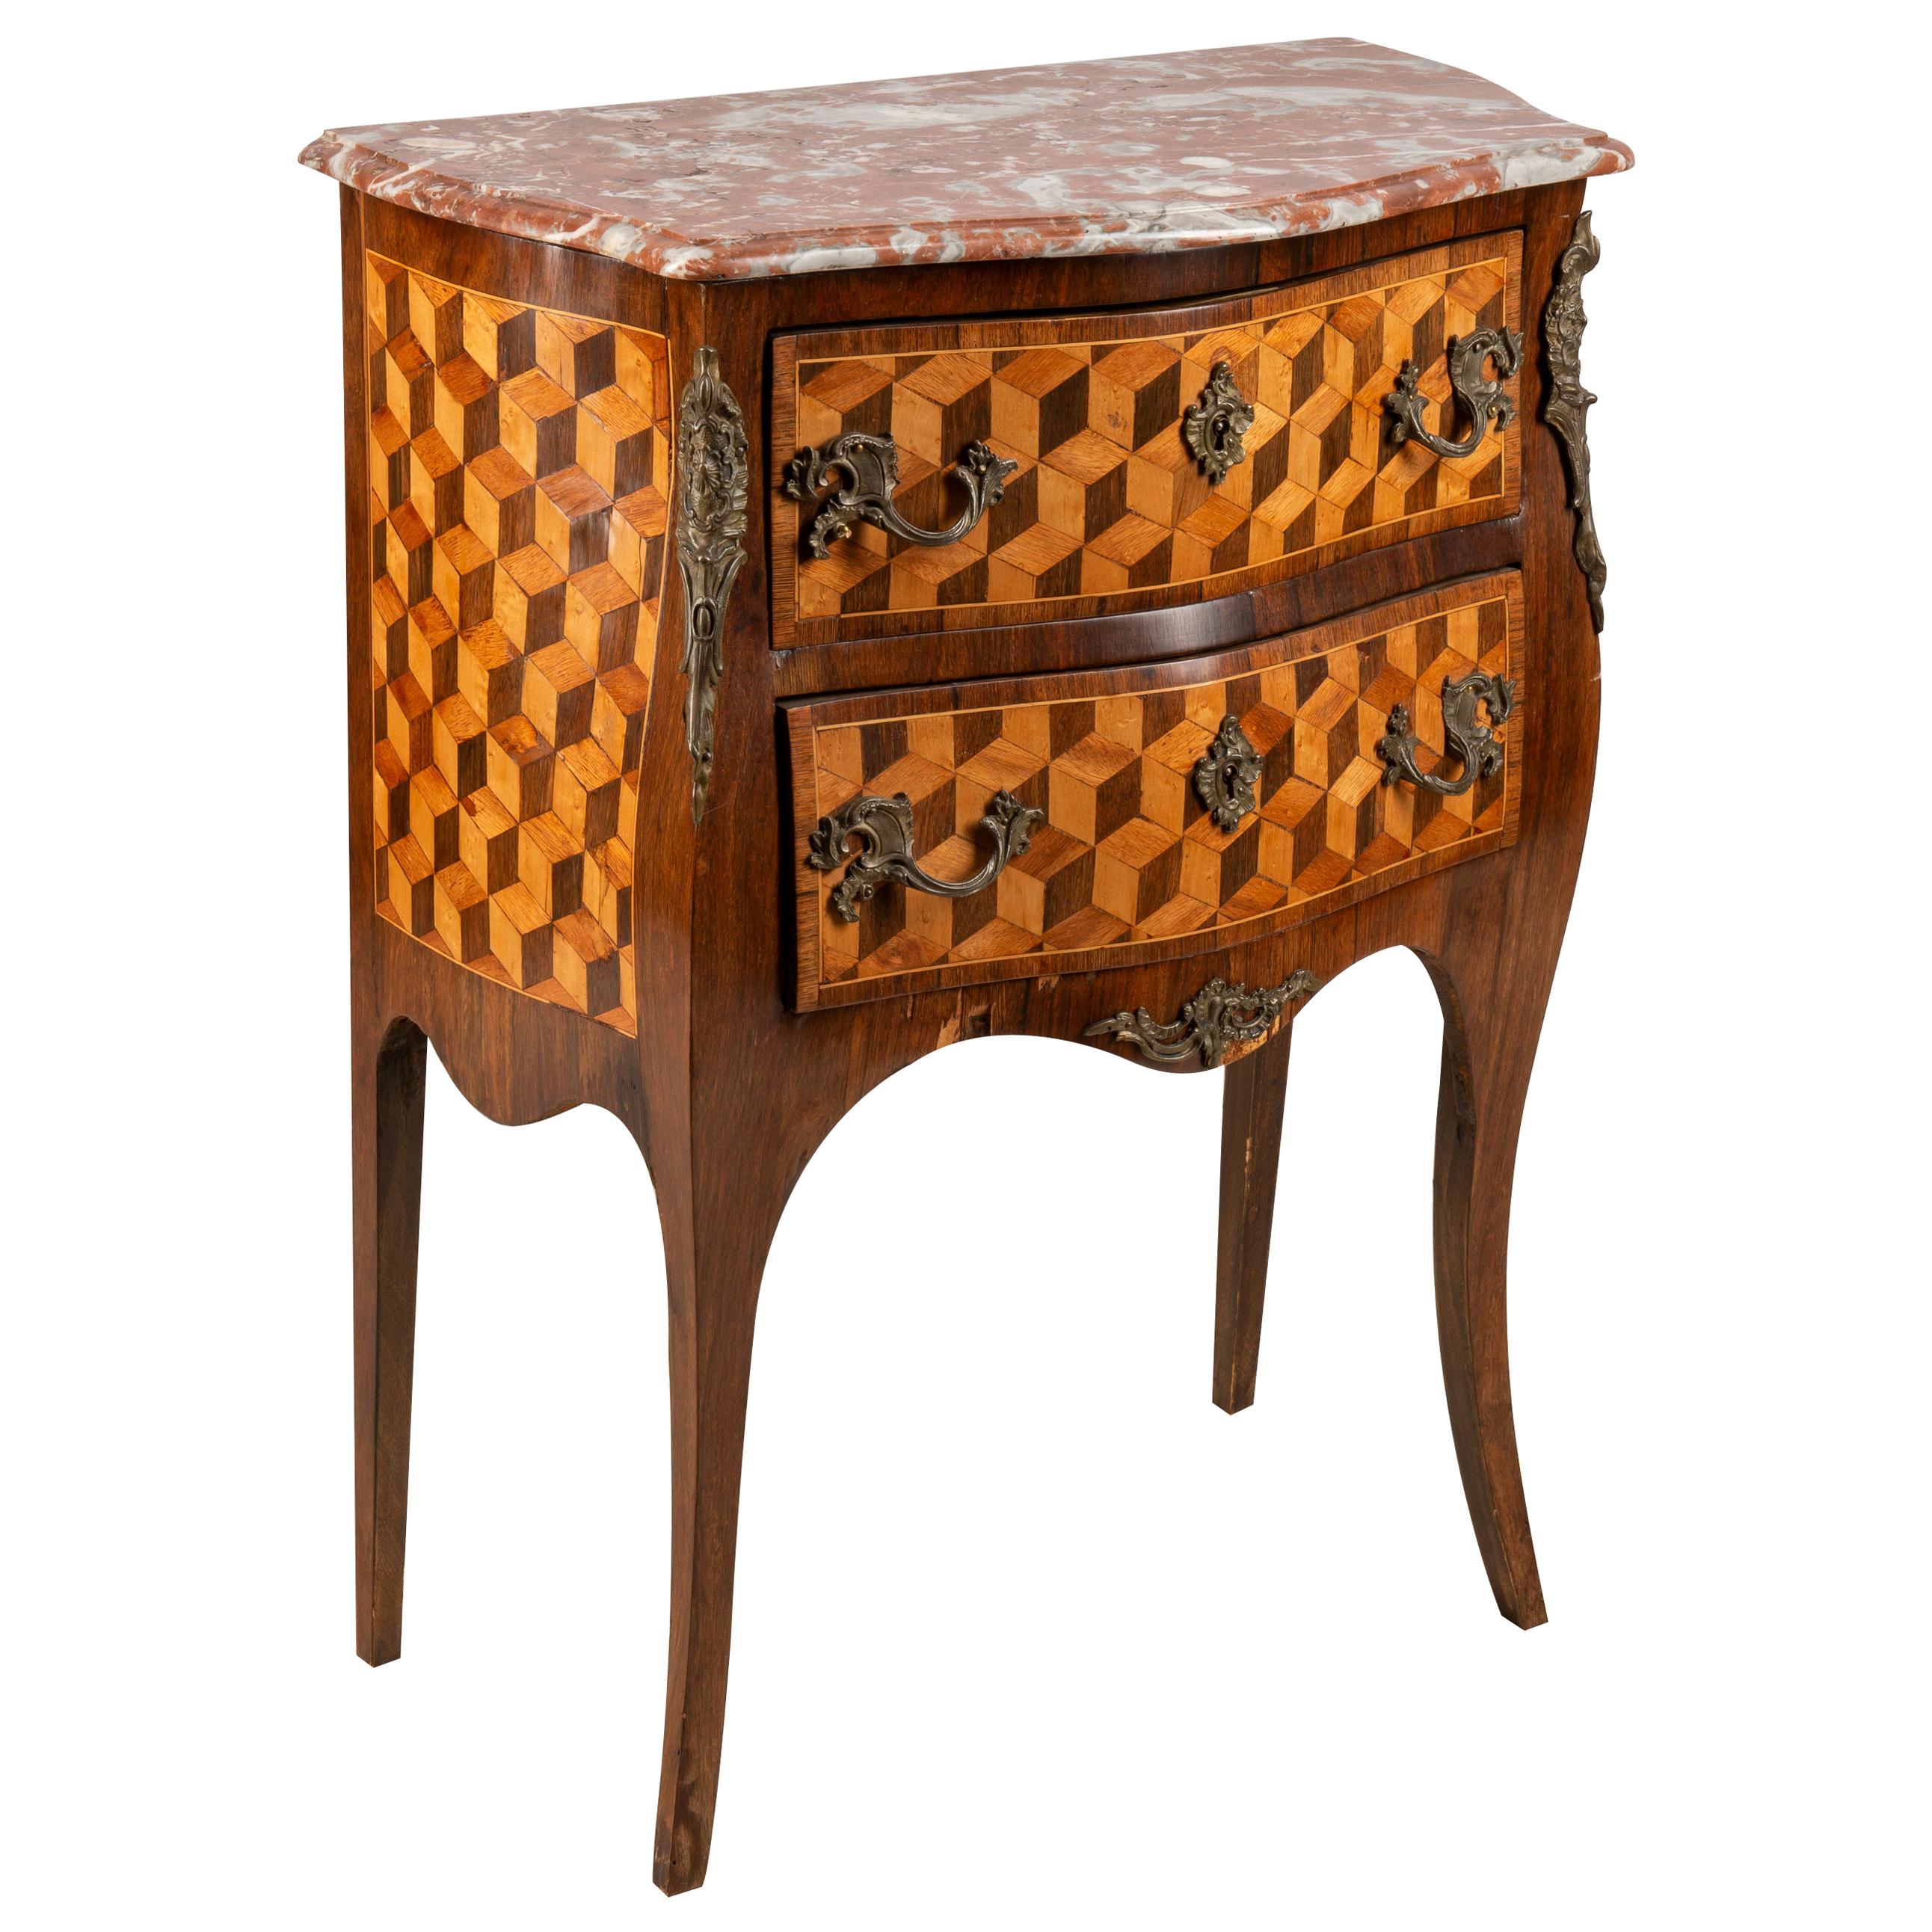 Small French Louis XVI Style Inlaid Commode, circa 1900